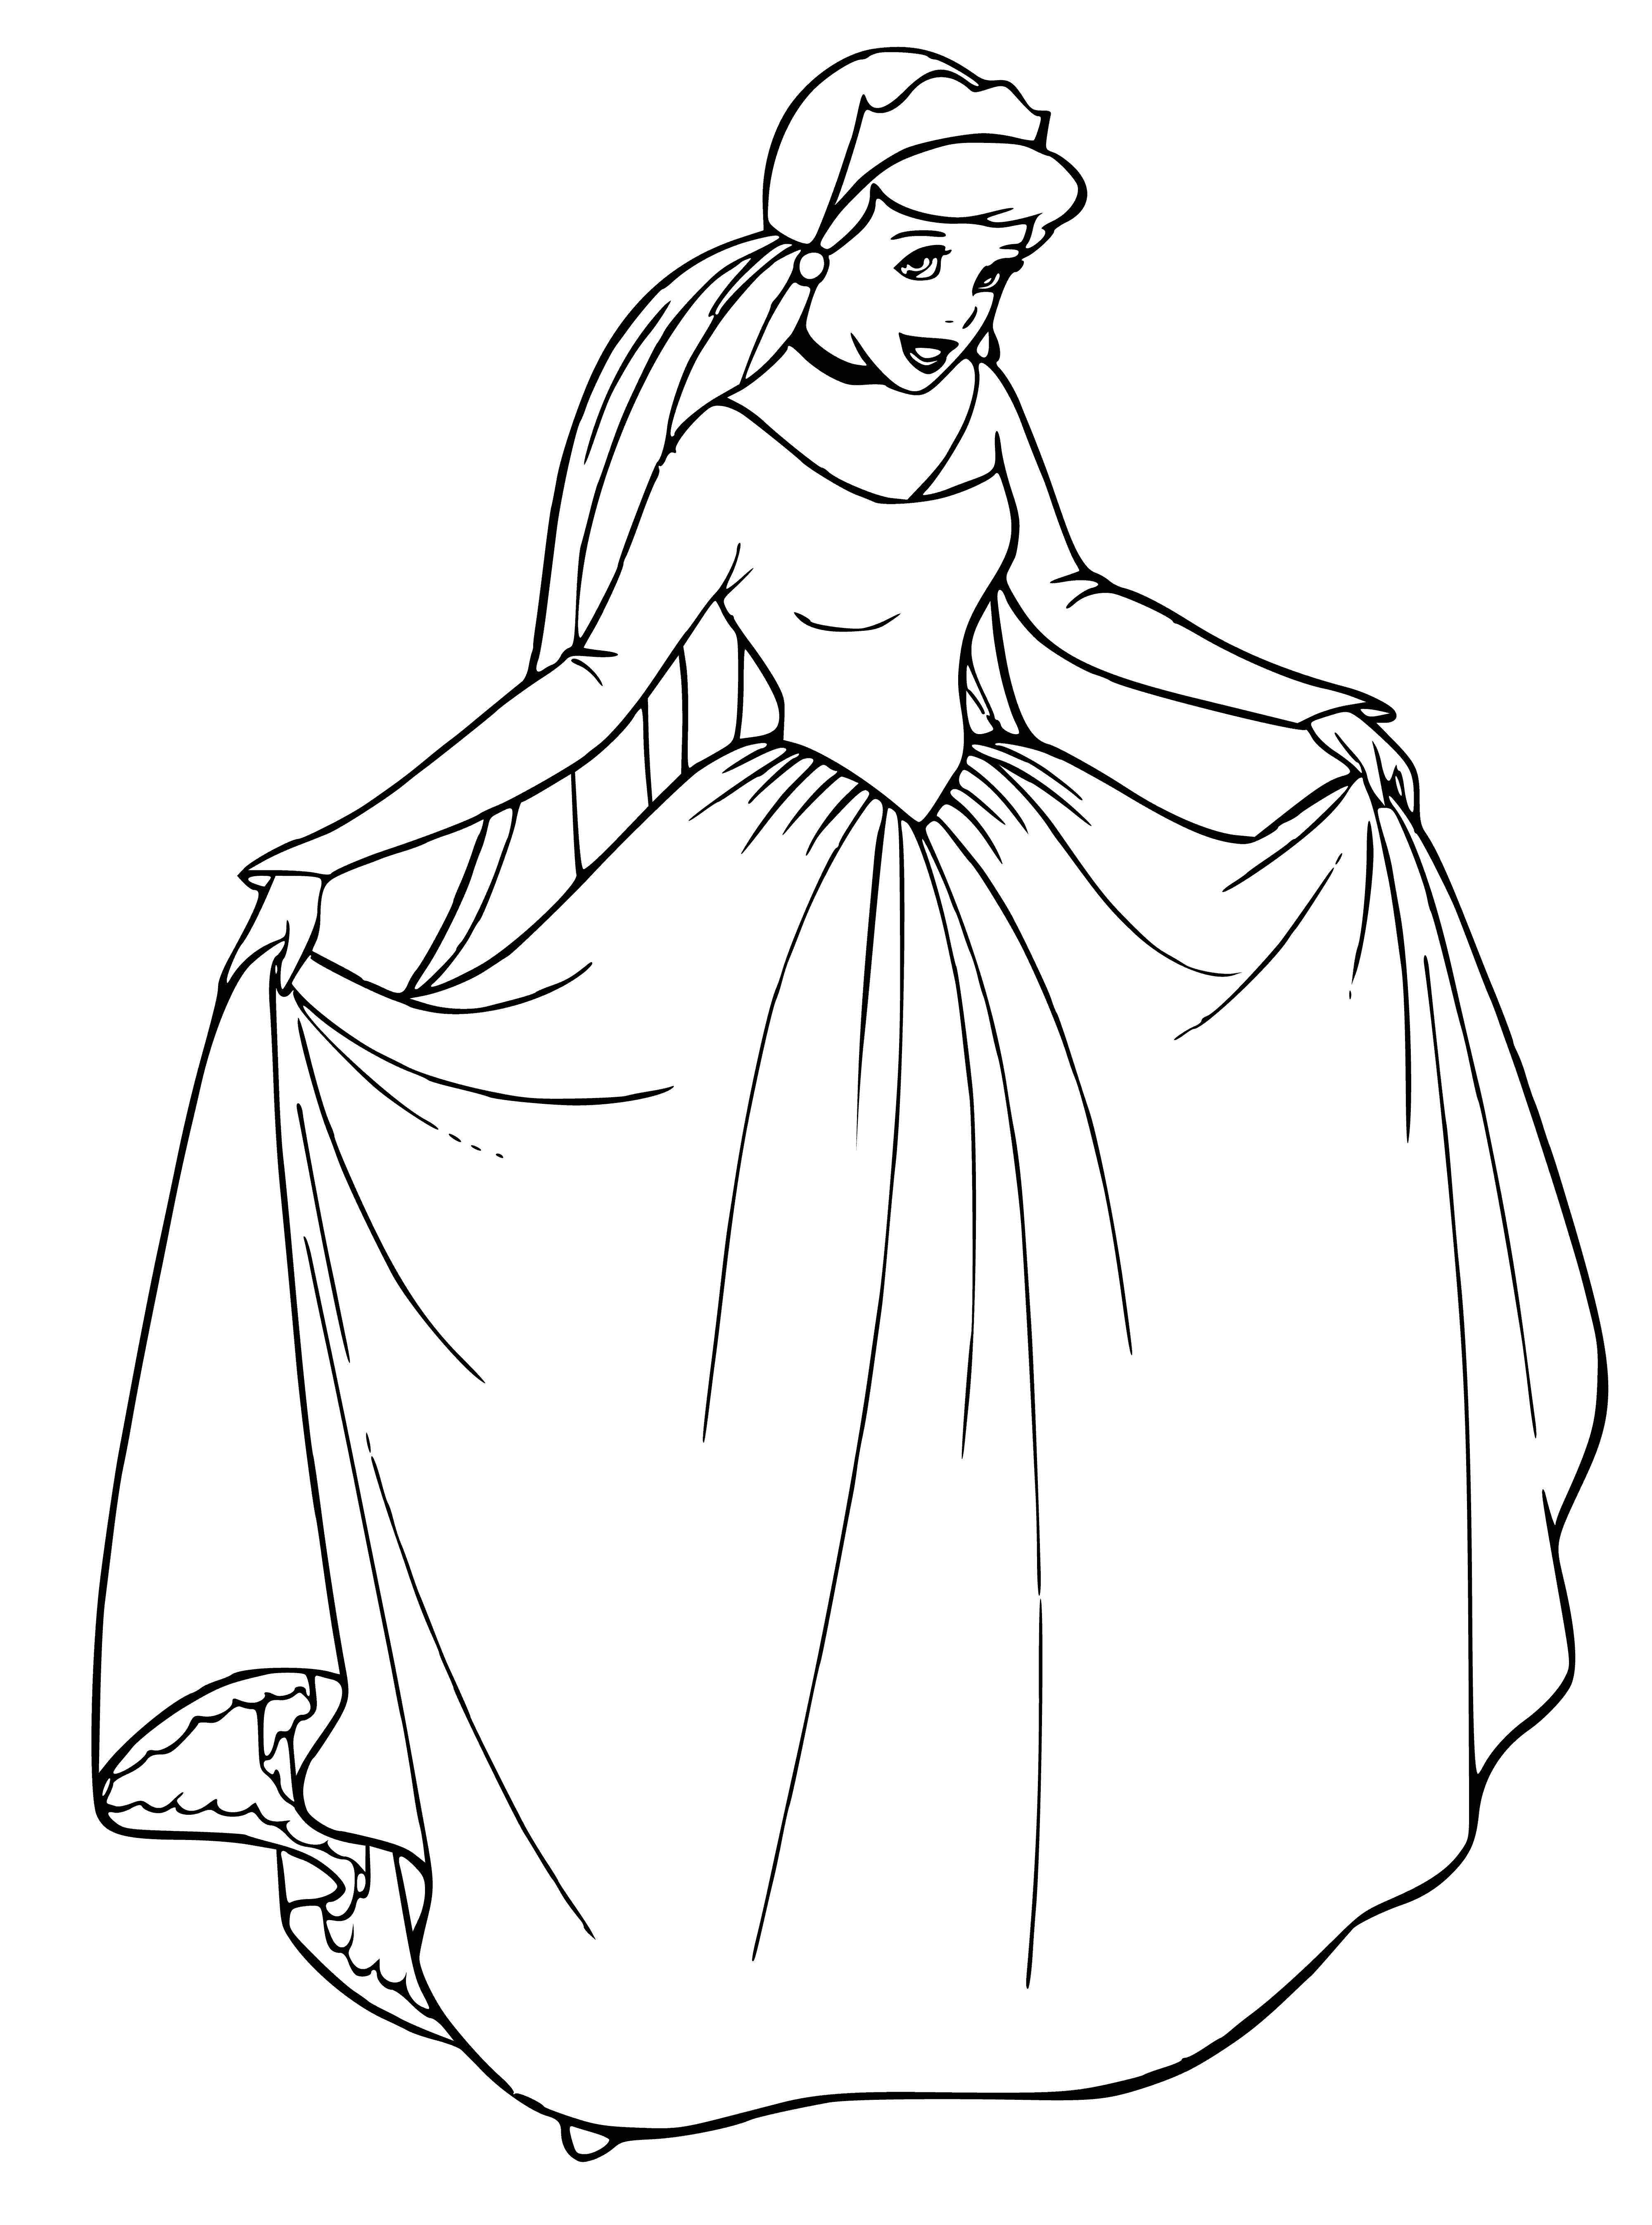 Cinderella's new dress coloring page